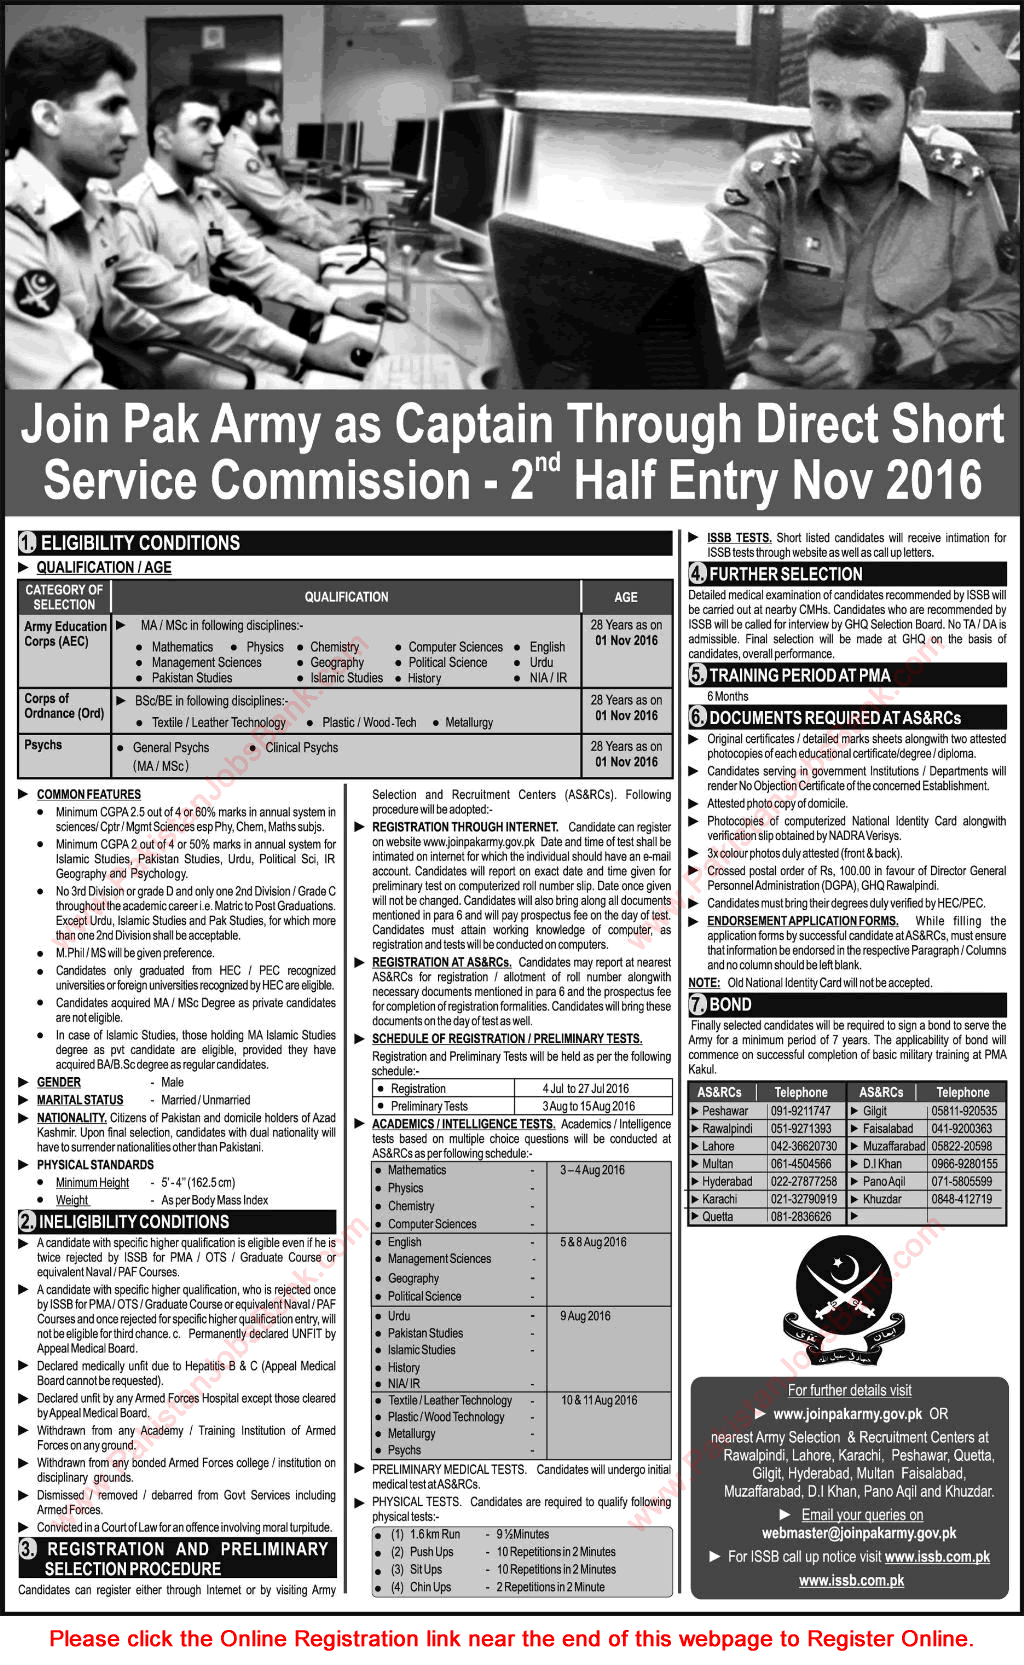 Join Pakistan Army as Captain July 2016 through Direct Short Service Commission Online Registration Latest